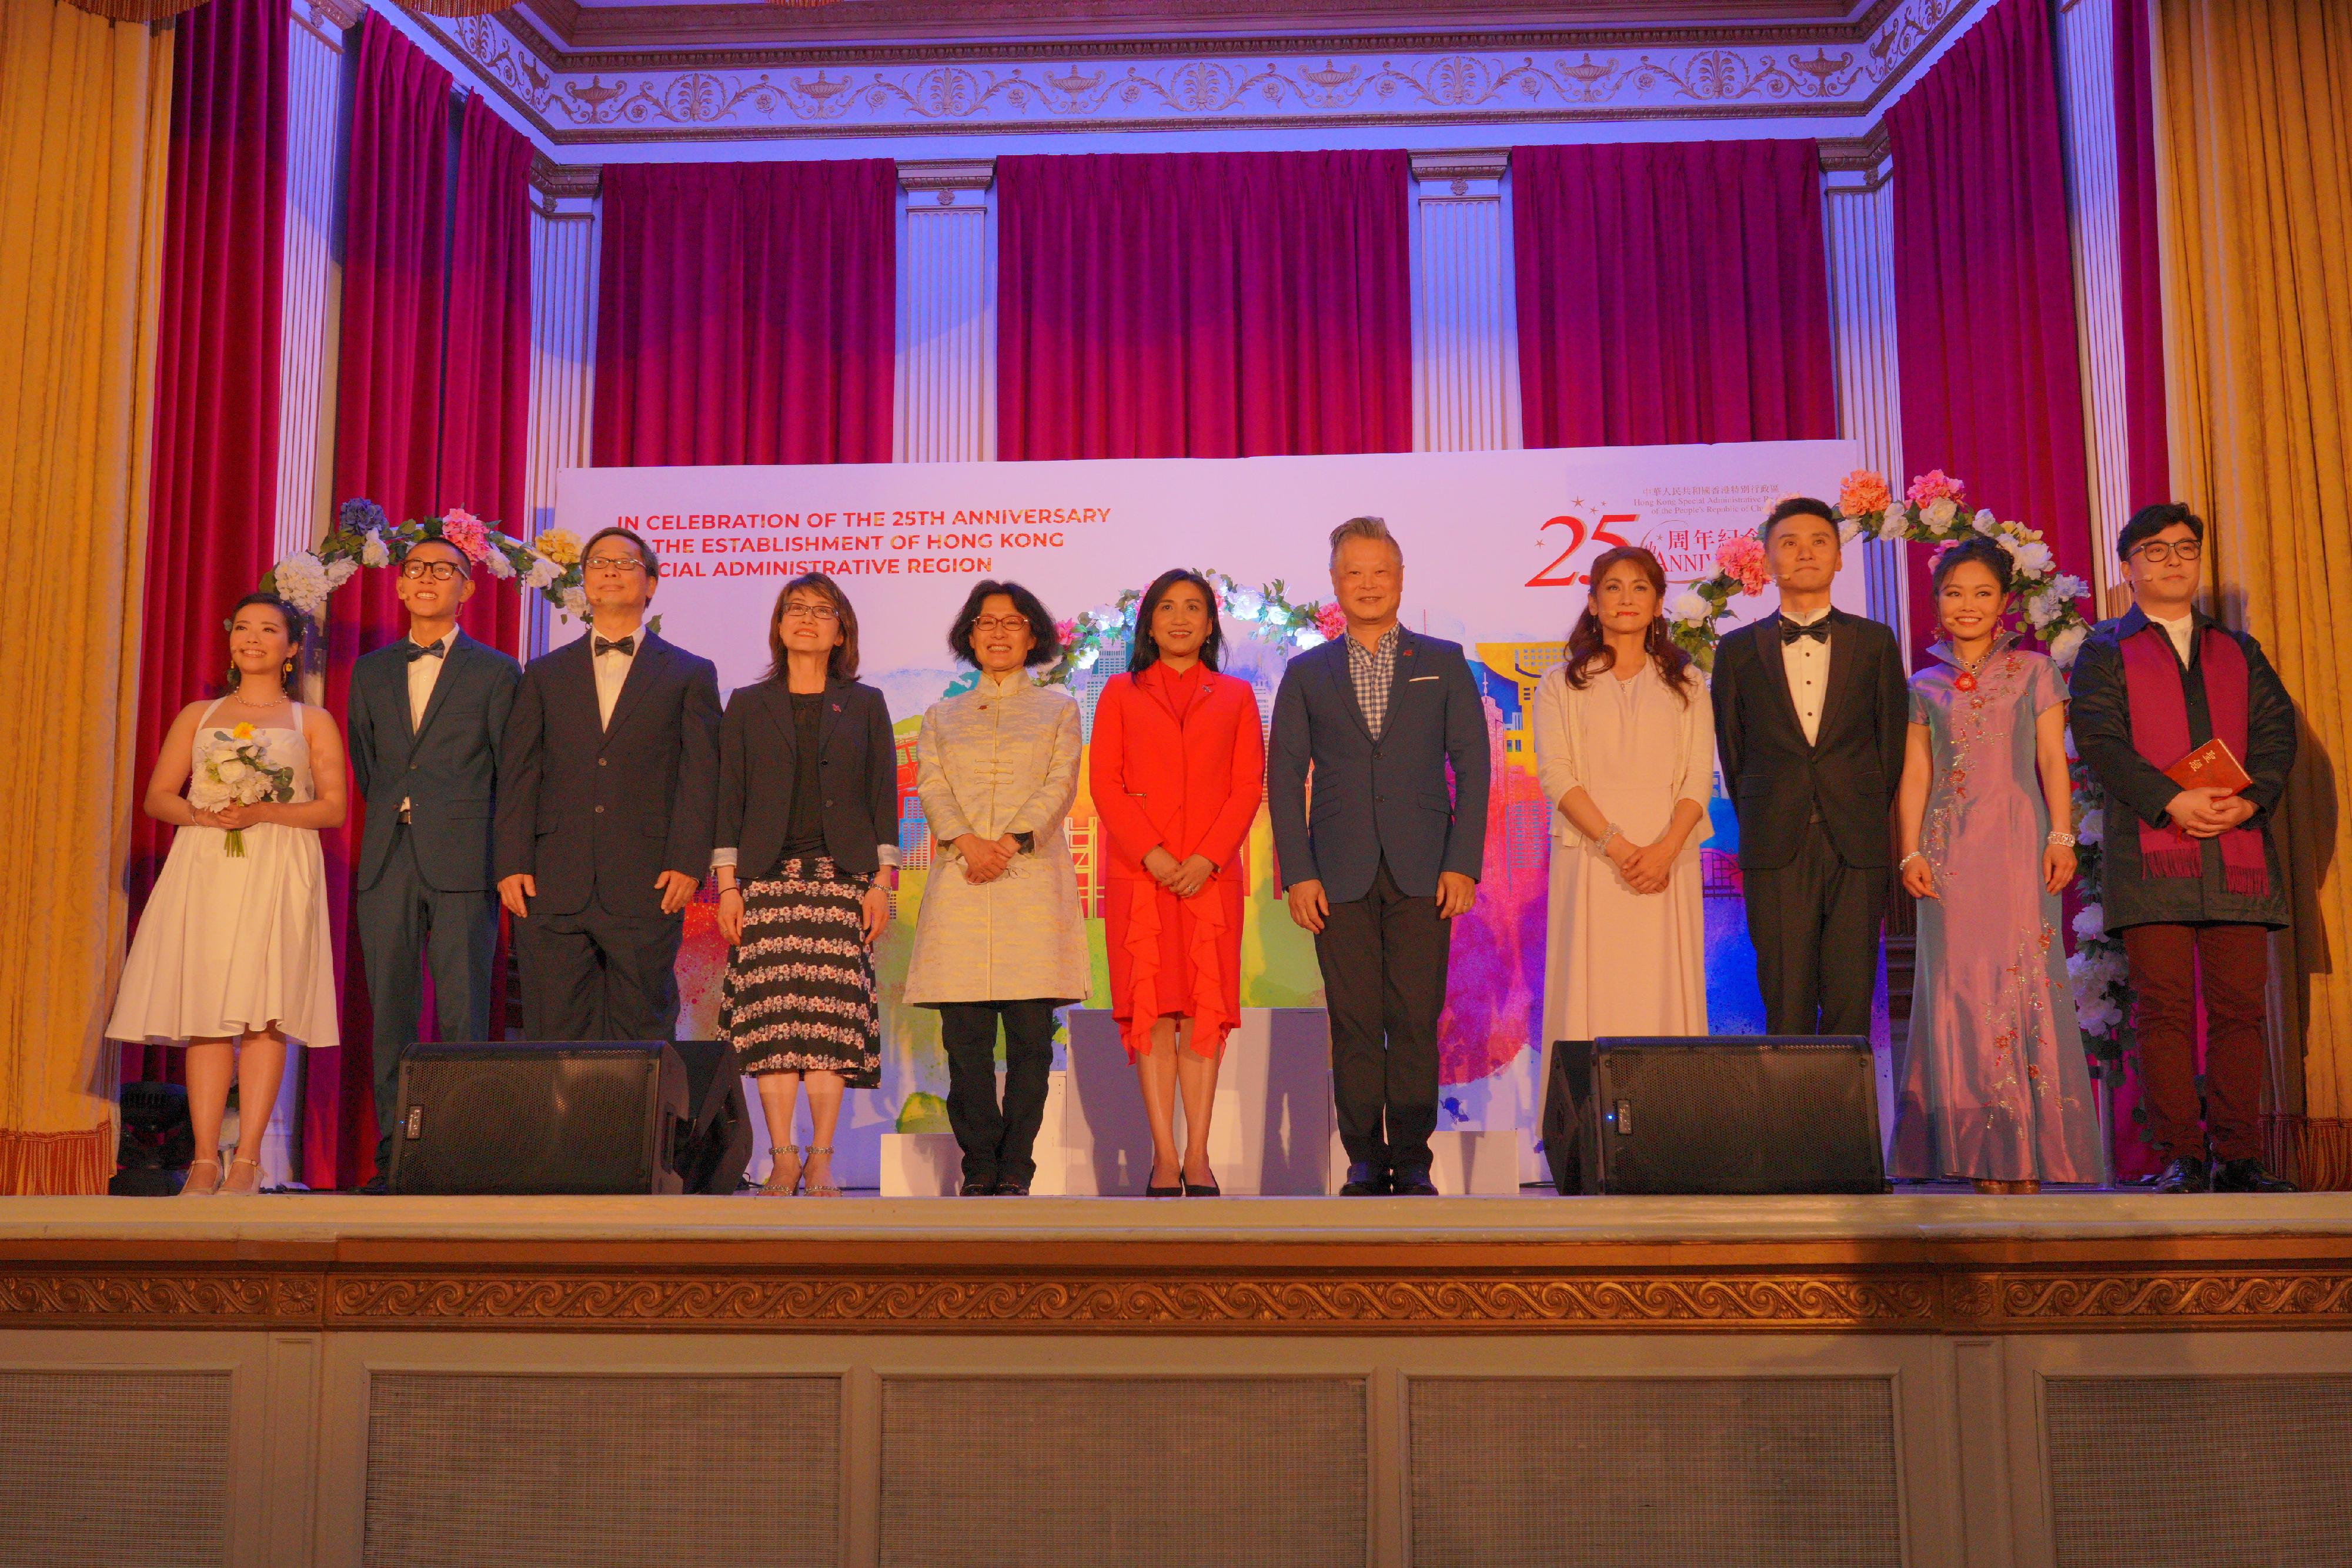 The Hong Kong Economic and Trade Office (Toronto) (Toronto ETO) held an official gala dinner in Vancouver, Canada, yesterday (June 23, Vancouver time) in celebration of the 25th anniversary of the establishment of the Hong Kong Special Administrative Region. The Director of the Toronto ETO, Ms Emily Mo (centre), is pictured with the Consul General of the People's Republic of China in Vancouver, Ms Tong Xiaoling (fifth left), the Executive Director of Dramaone Canada, Ms May Soo (fourth left), the Artistic Director of Dramaone Canada, Peter Poon (fifth right), and performers of the musical drama "Button of Love".
